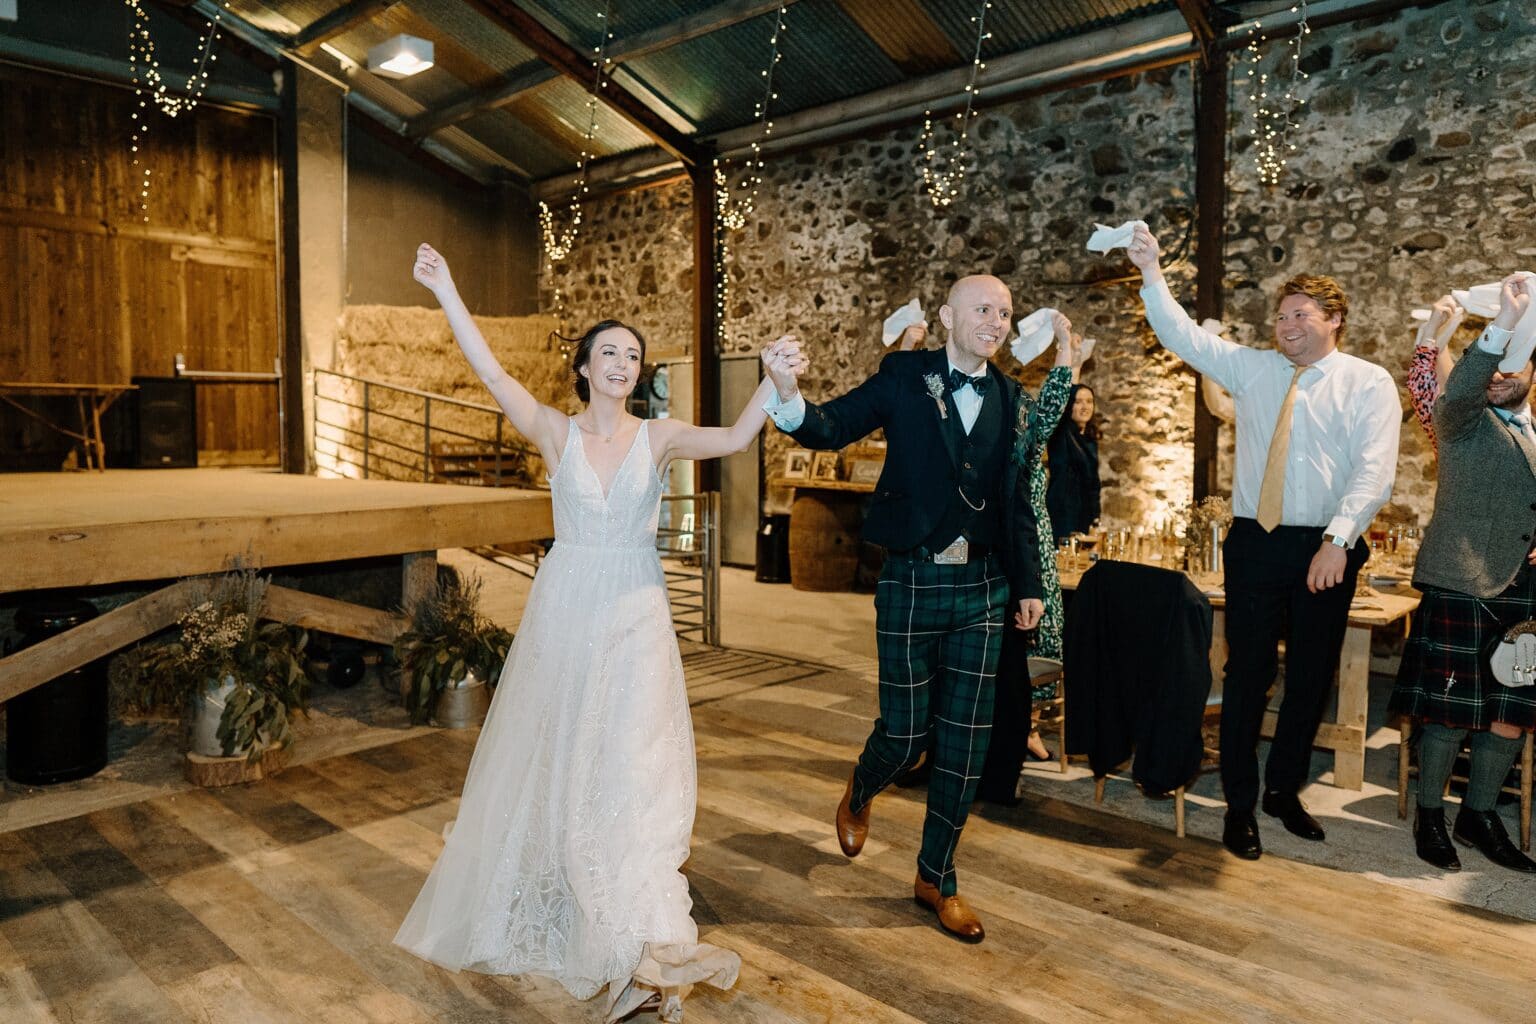 in a stone walled room with festoon lighting and hay bales in the background guests stand and wave white napkins as the bride and groom arrive for their wedding dinner at their barn wedding venue near glasgow scotland